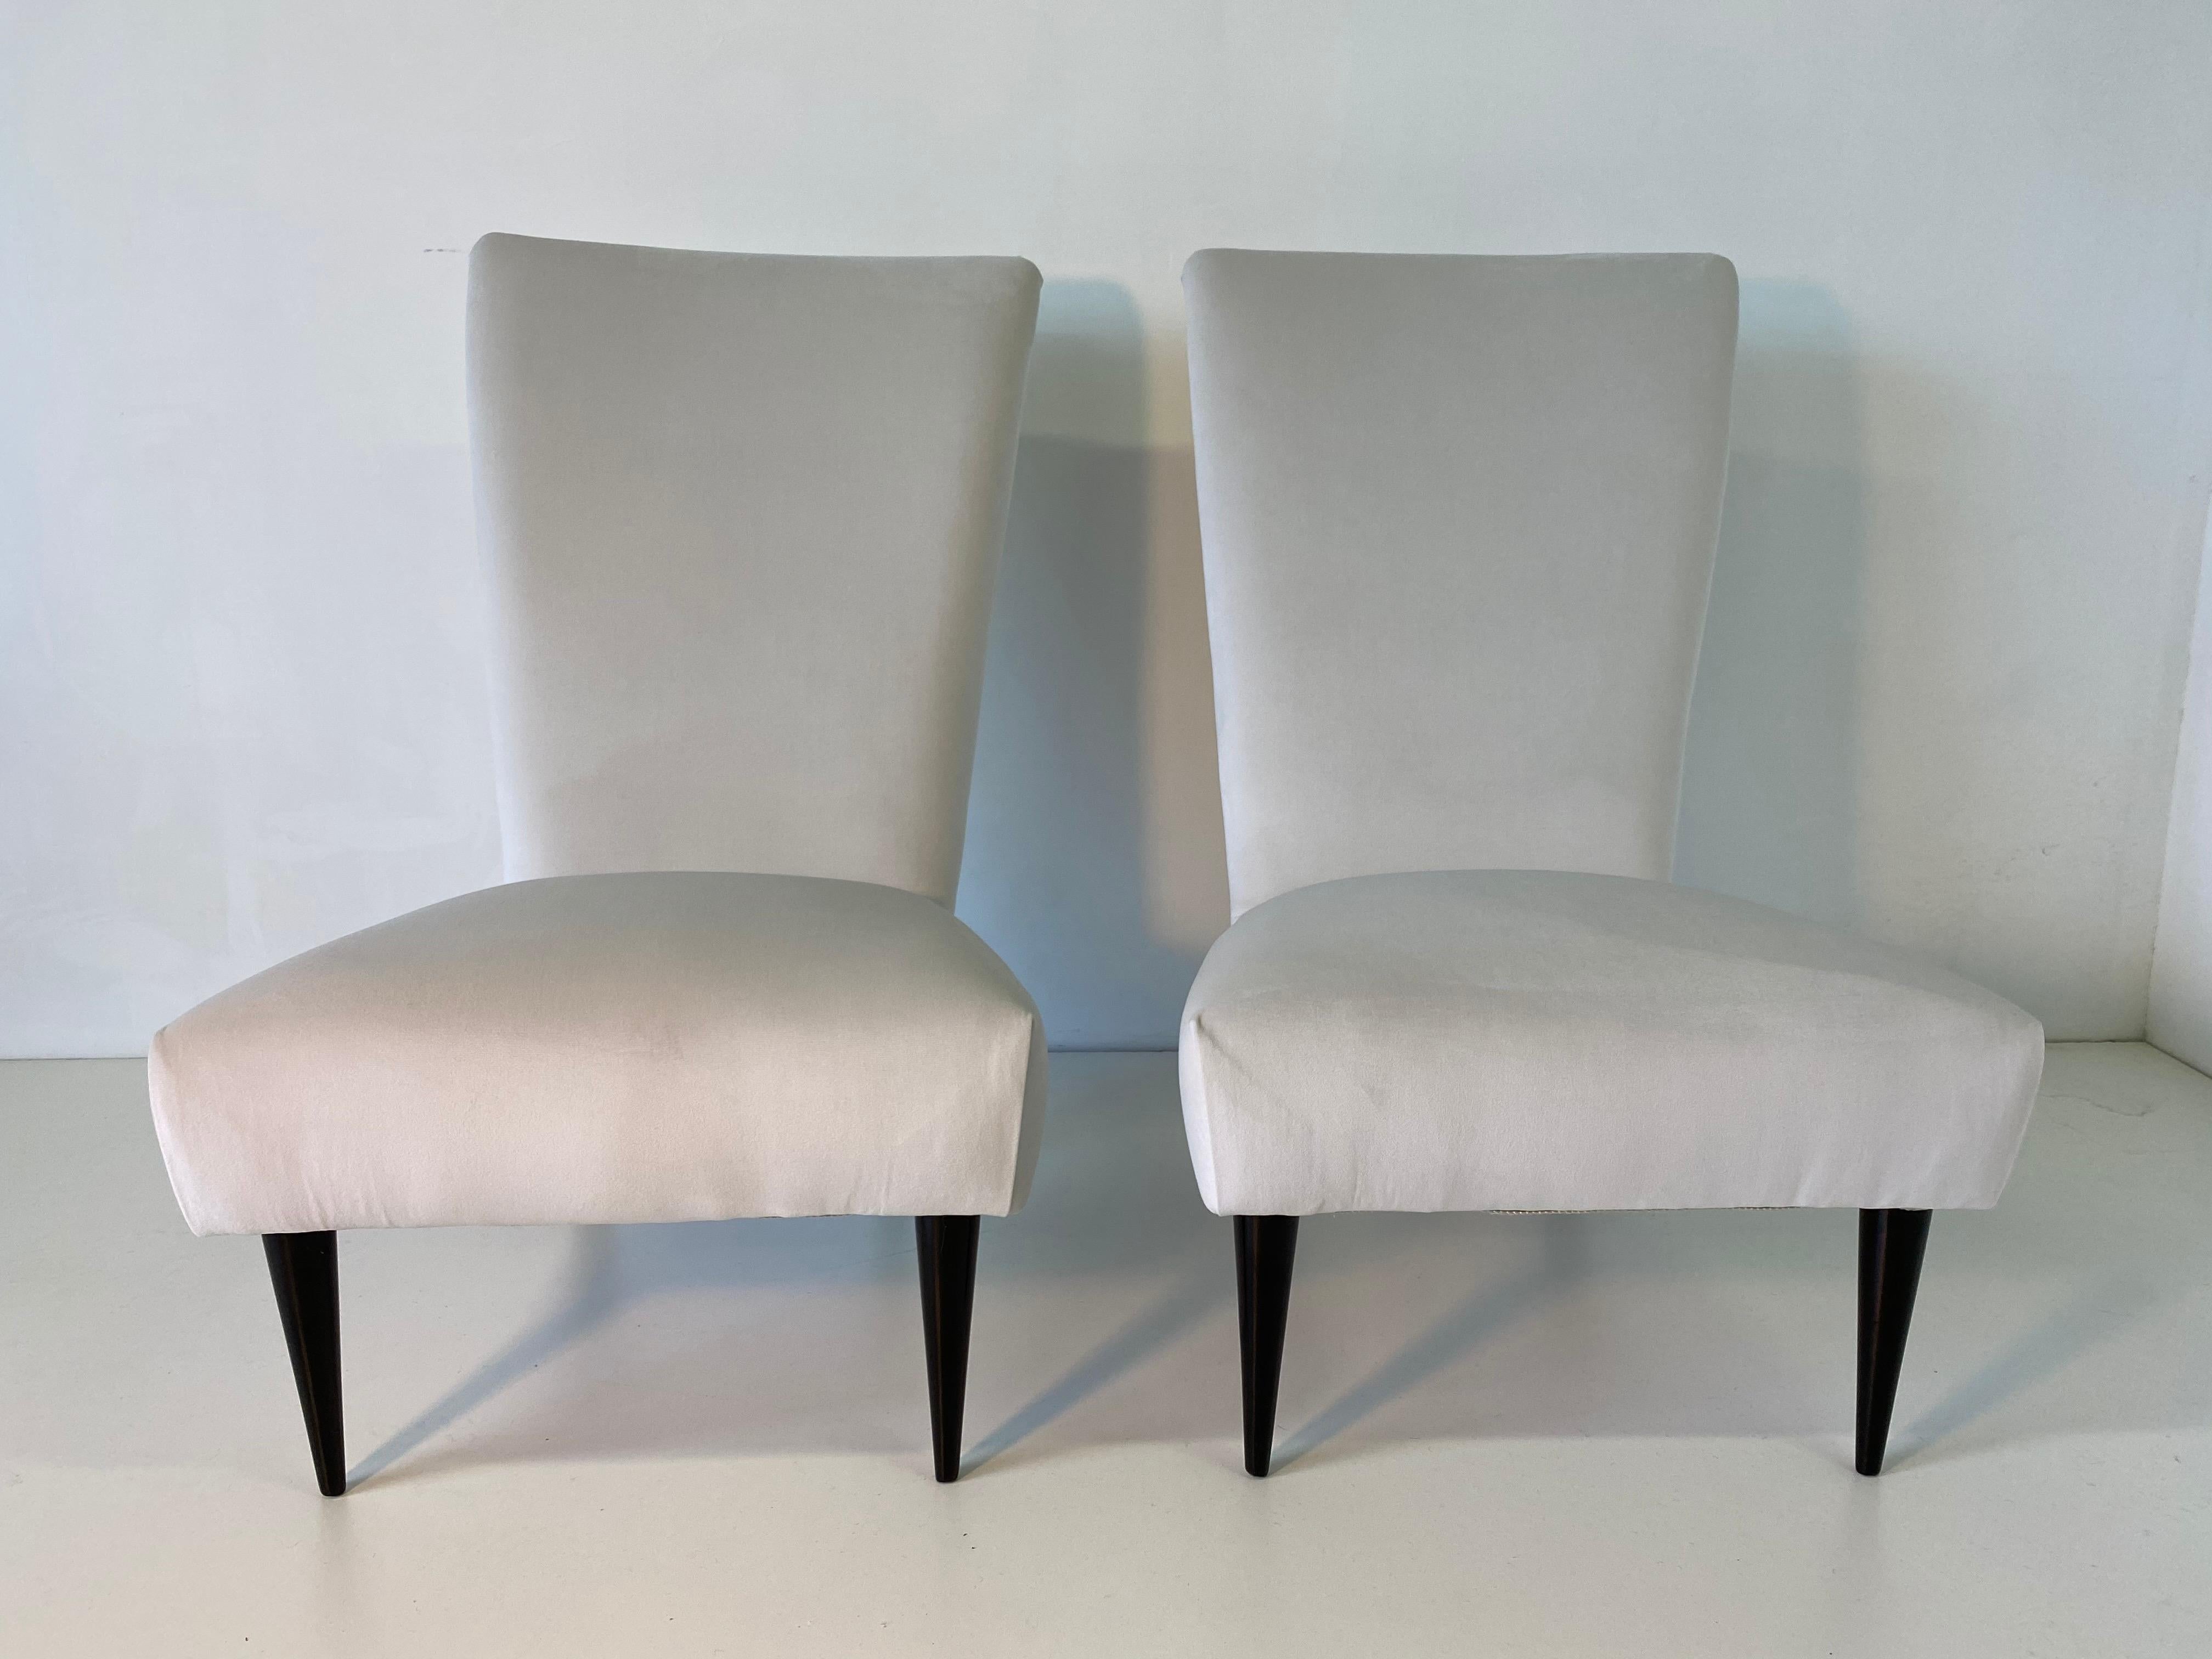 Art Deco Pair of Italian Black Lacquered and White Velvet Armchairs, 1940s For Sale